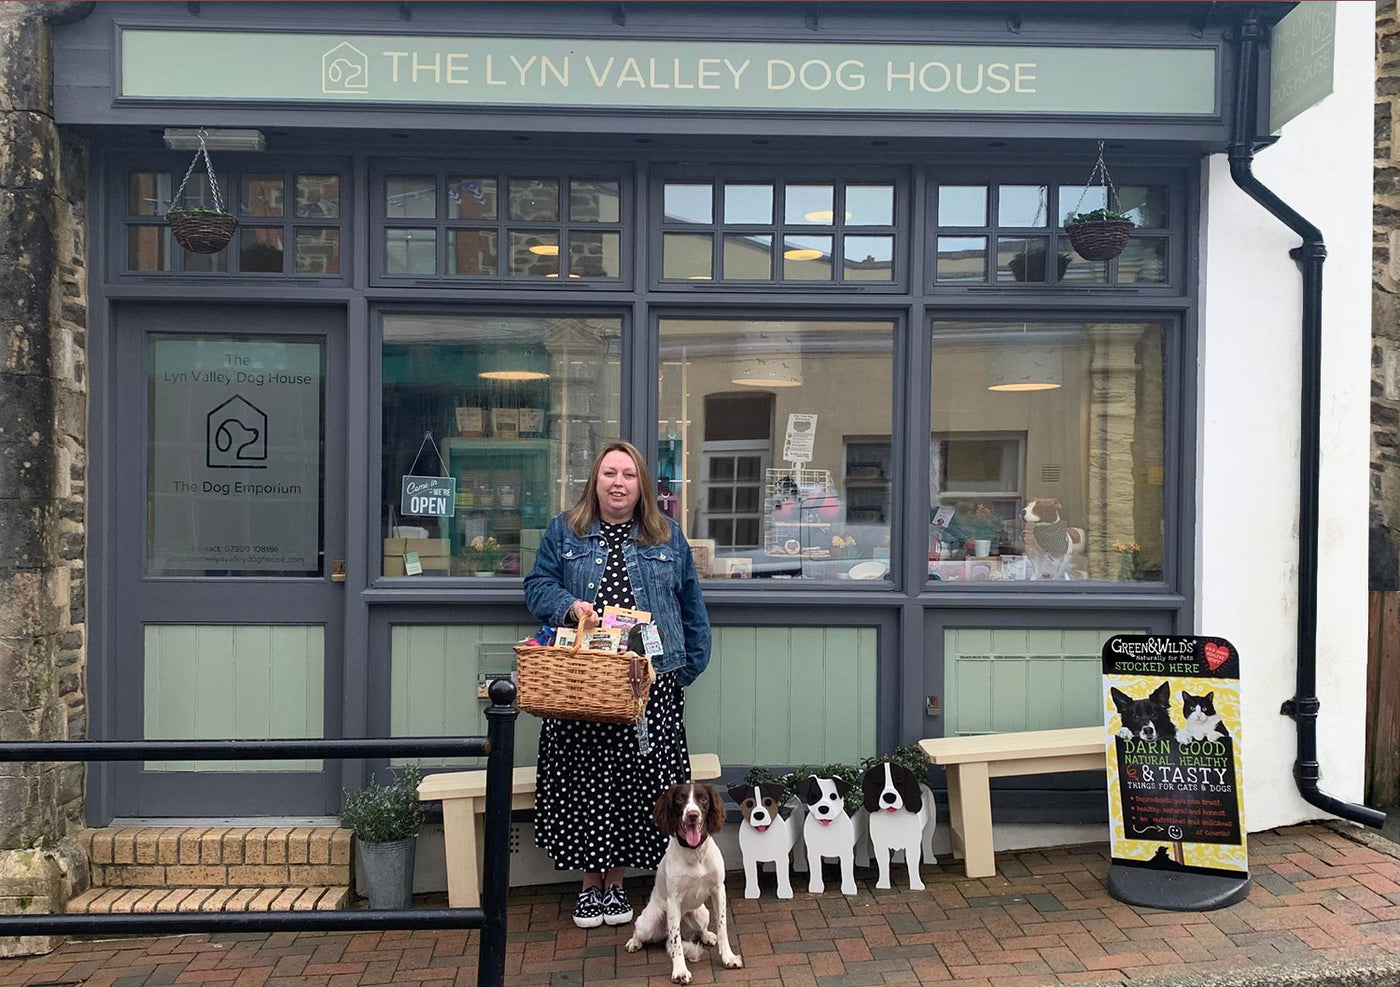 Stockist Jacquie with her dog, Mabel and The Lyn Valley Dog House